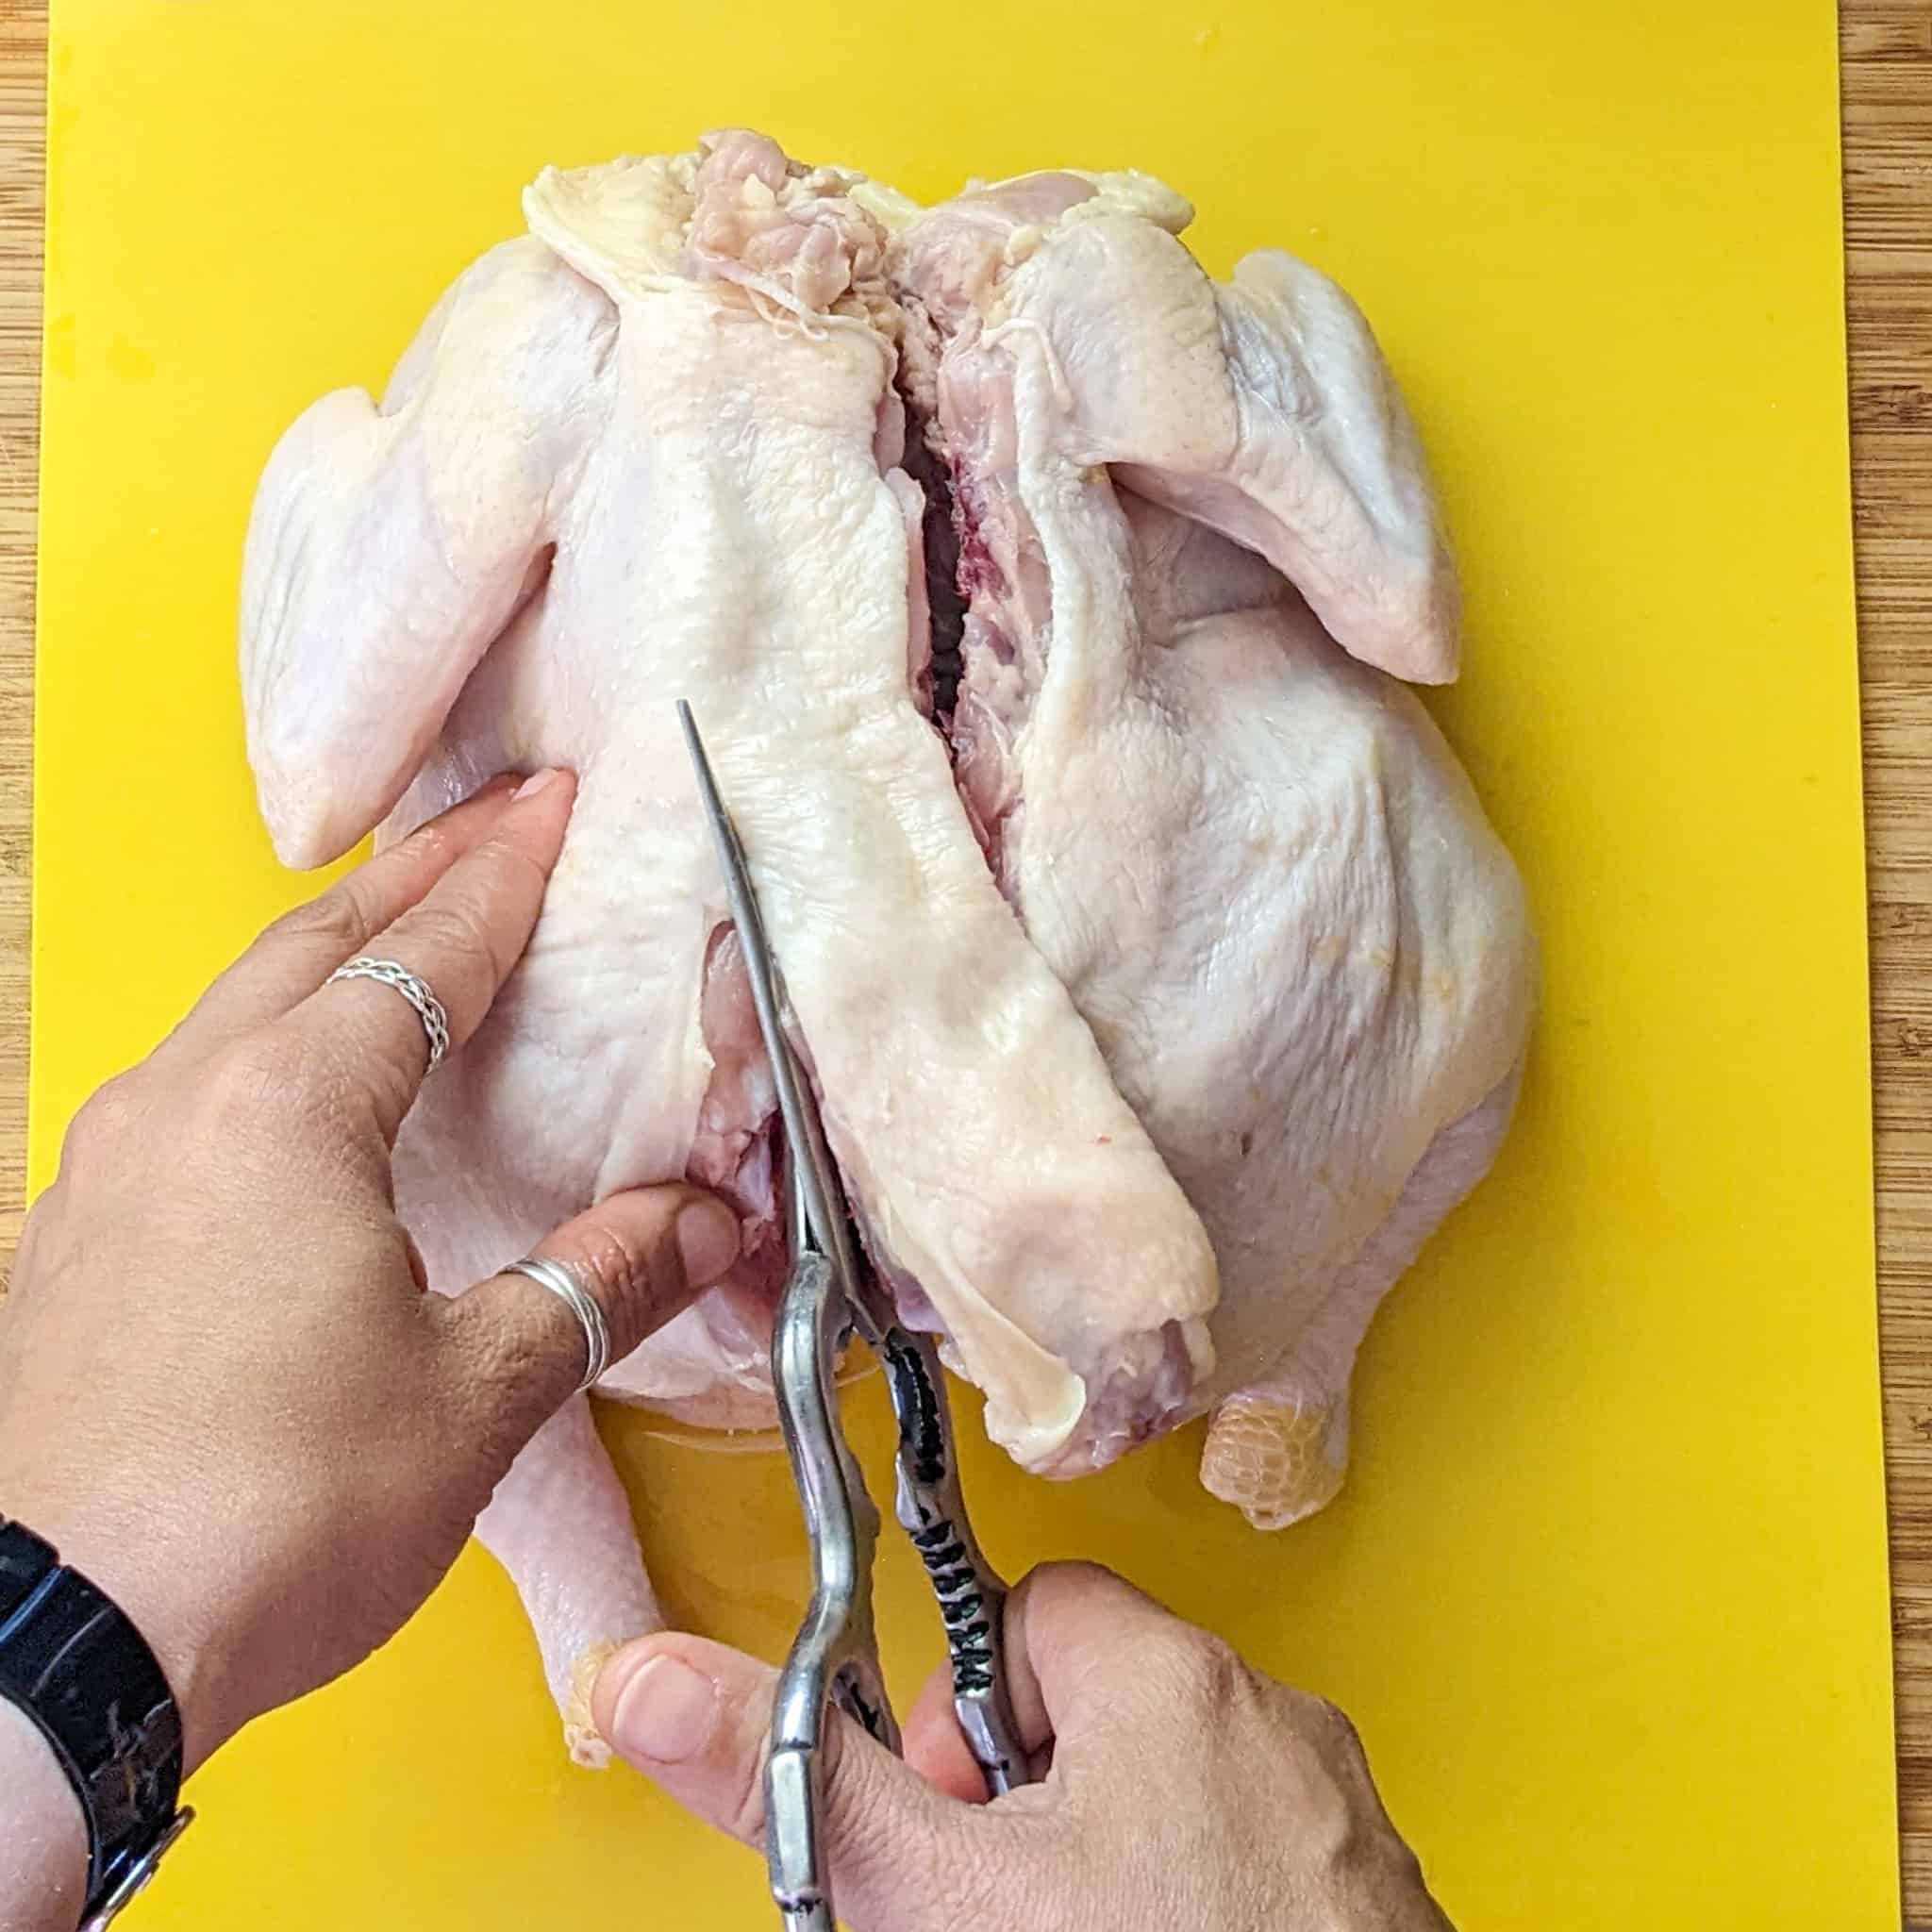 whole chicken on the cutting board being cut with kitchen shears from the bottom up on the left side of the chicken's backbone.